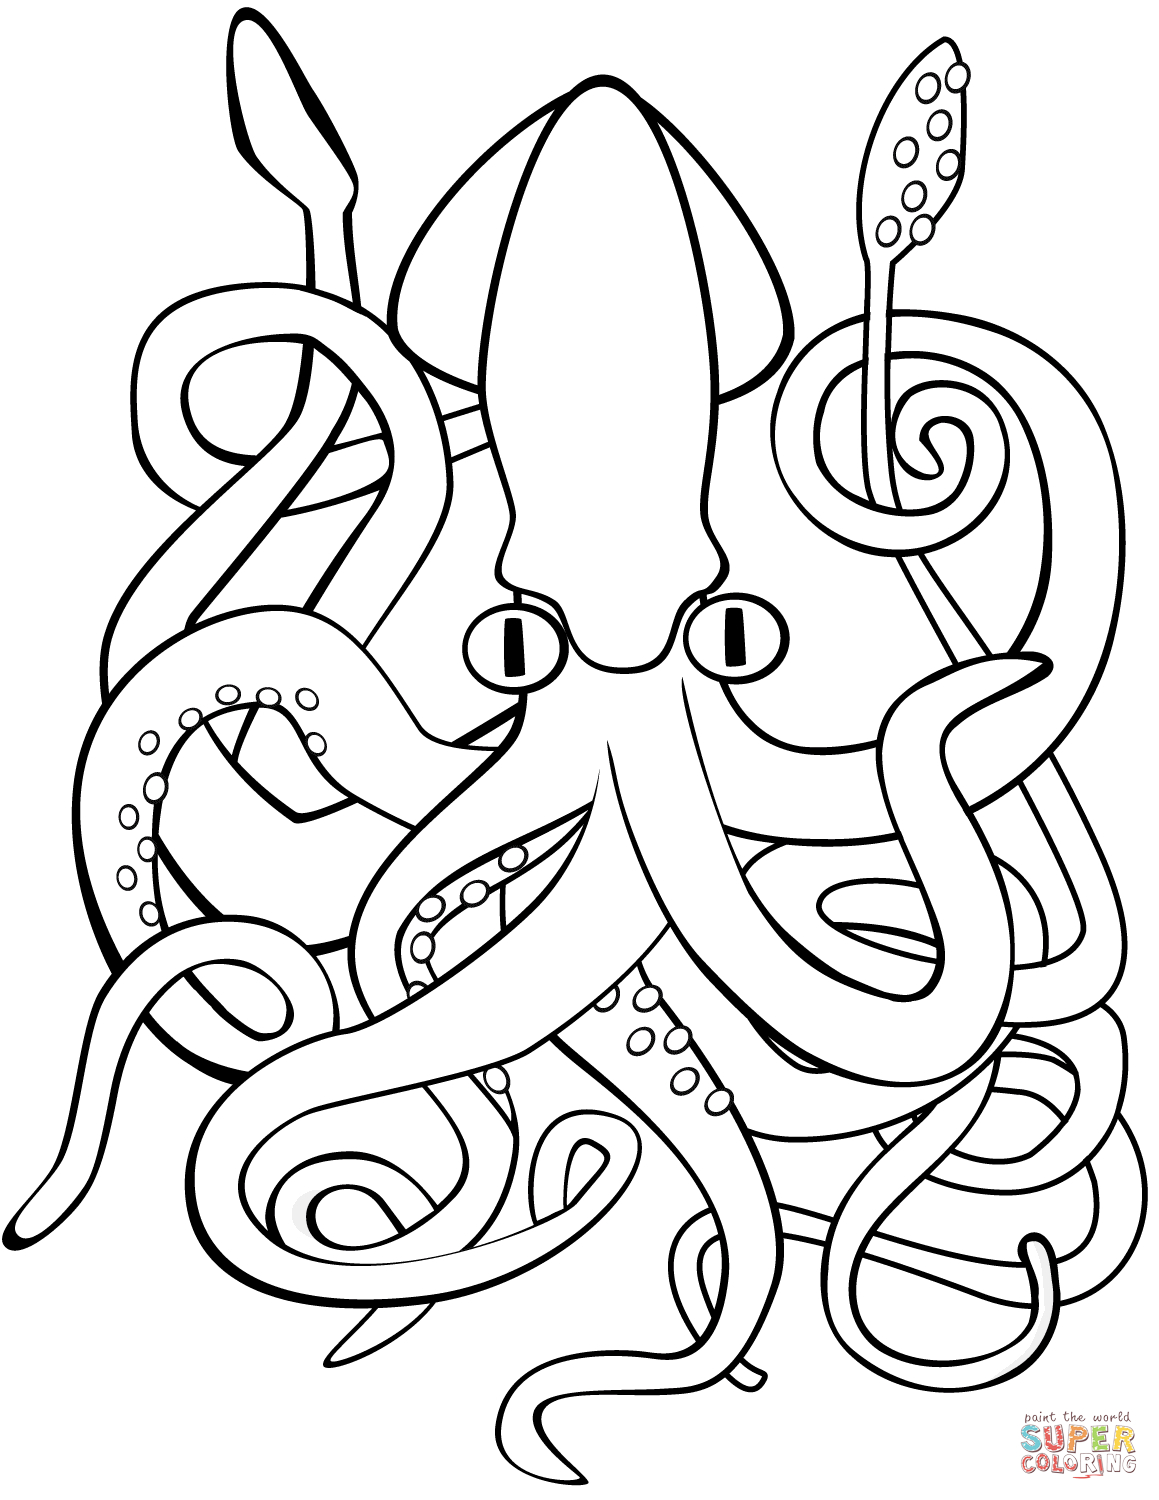 Squid Coloring Pages Printable Squid Coloring Page Free Printable Coloring Pages